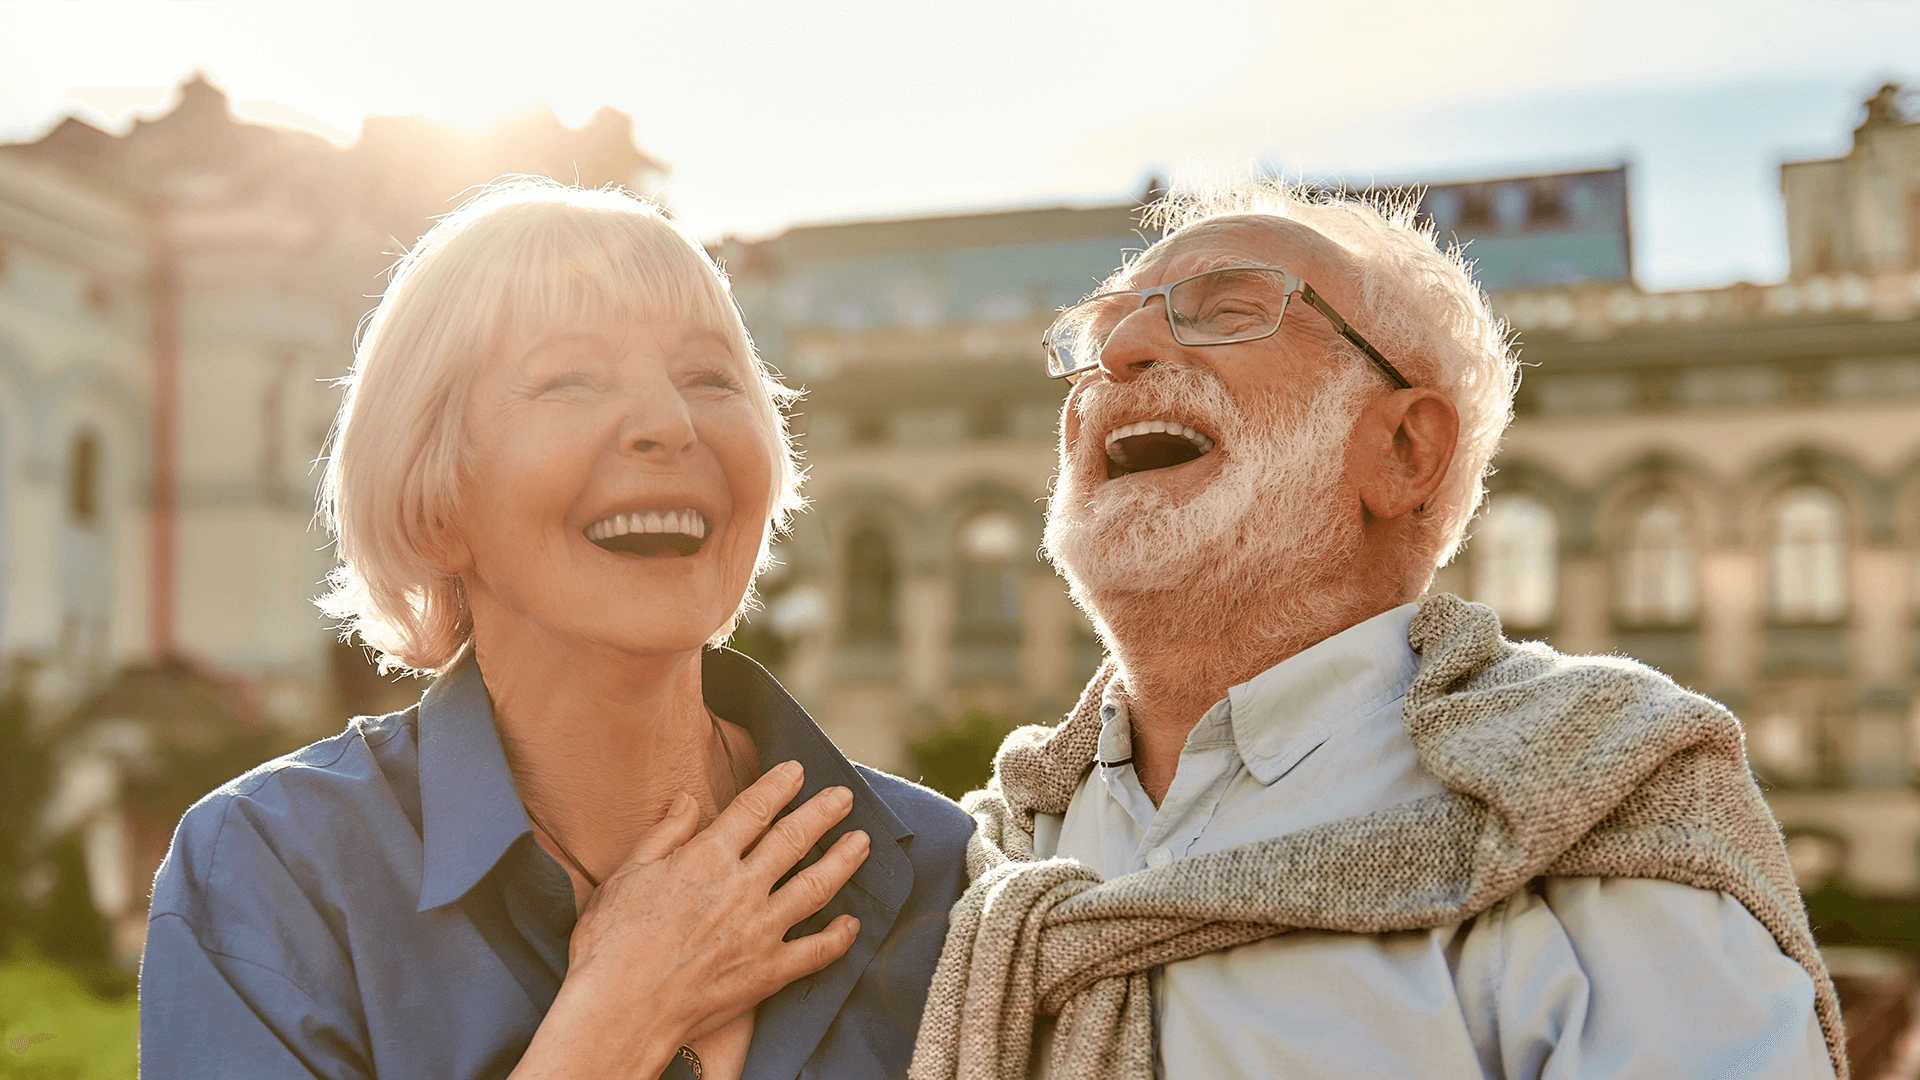 Elderly couple laughing joyfully together in a sunlit urban setting, with historical buildings in the background.